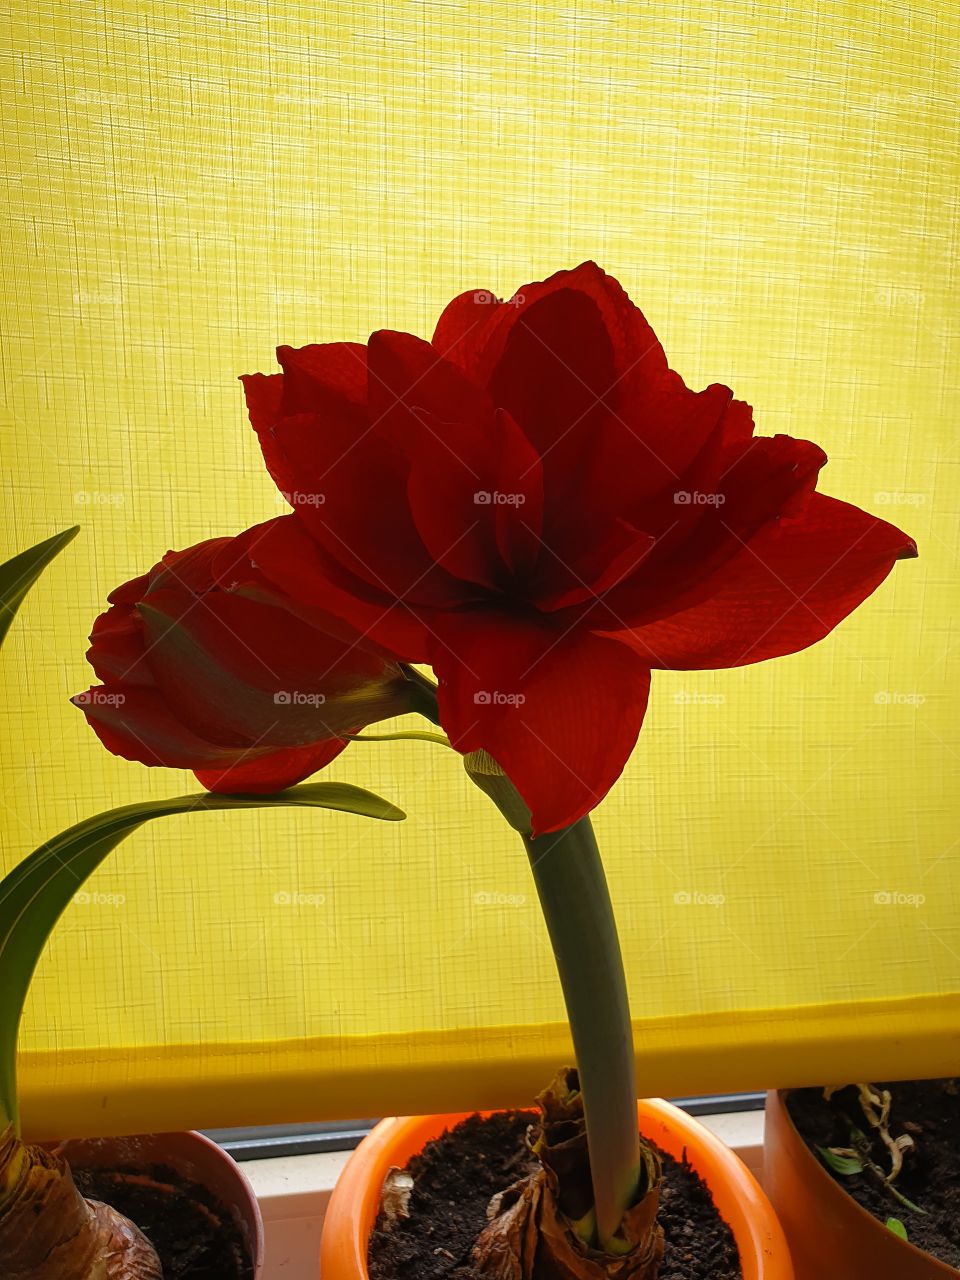 red amaryllis flower and a bud in front of yellow curtain